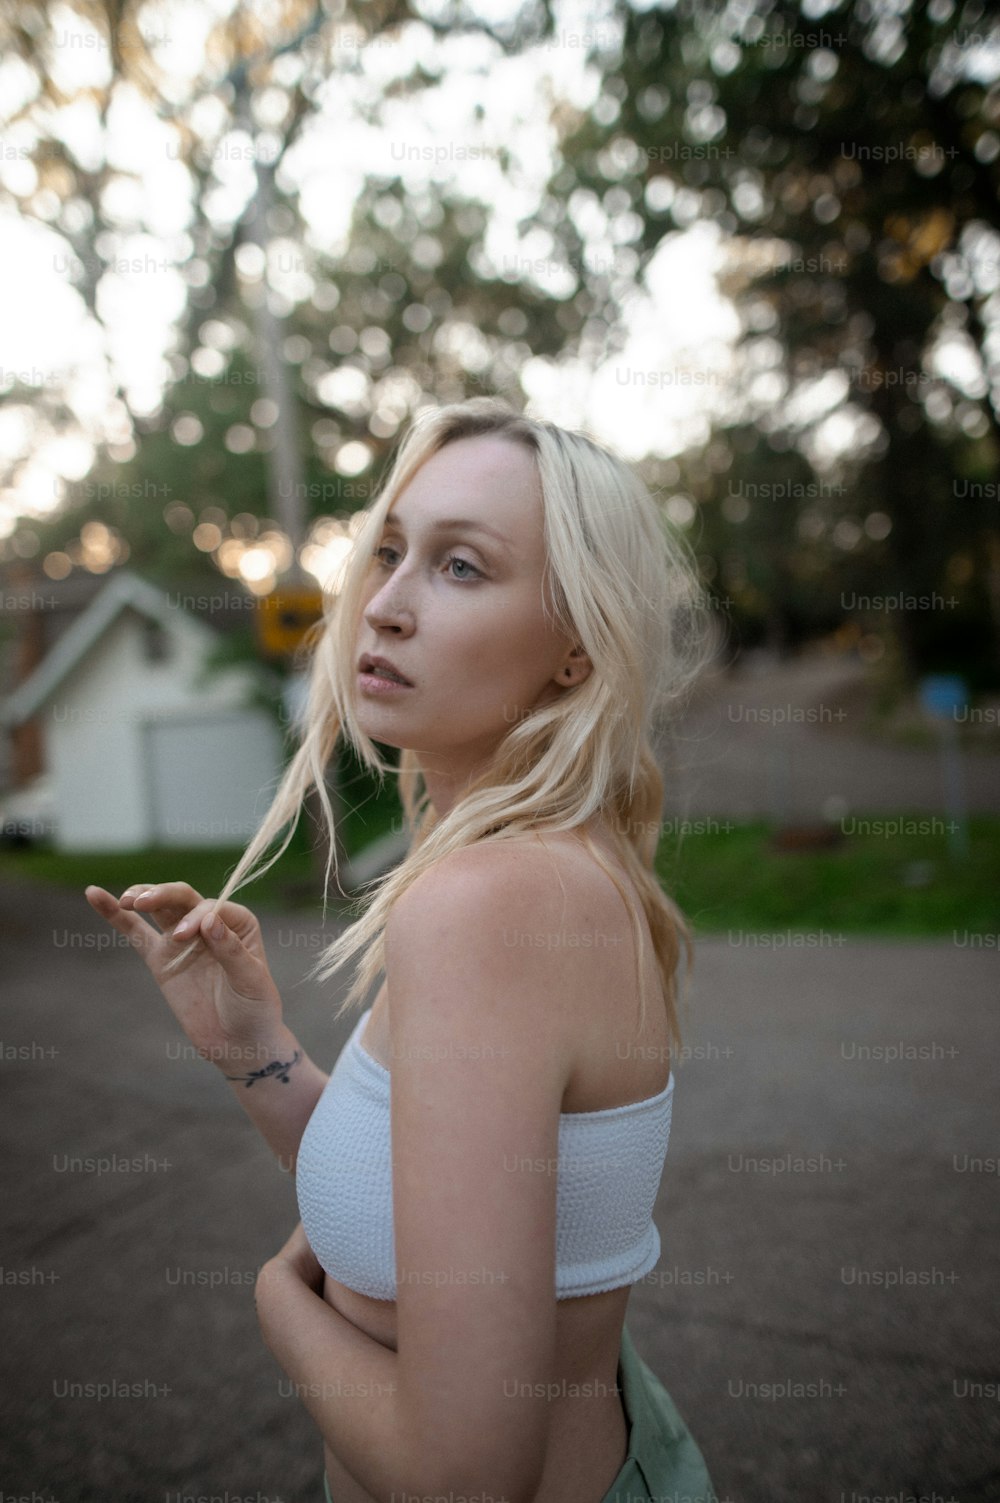 a woman in a white top smoking a cigarette